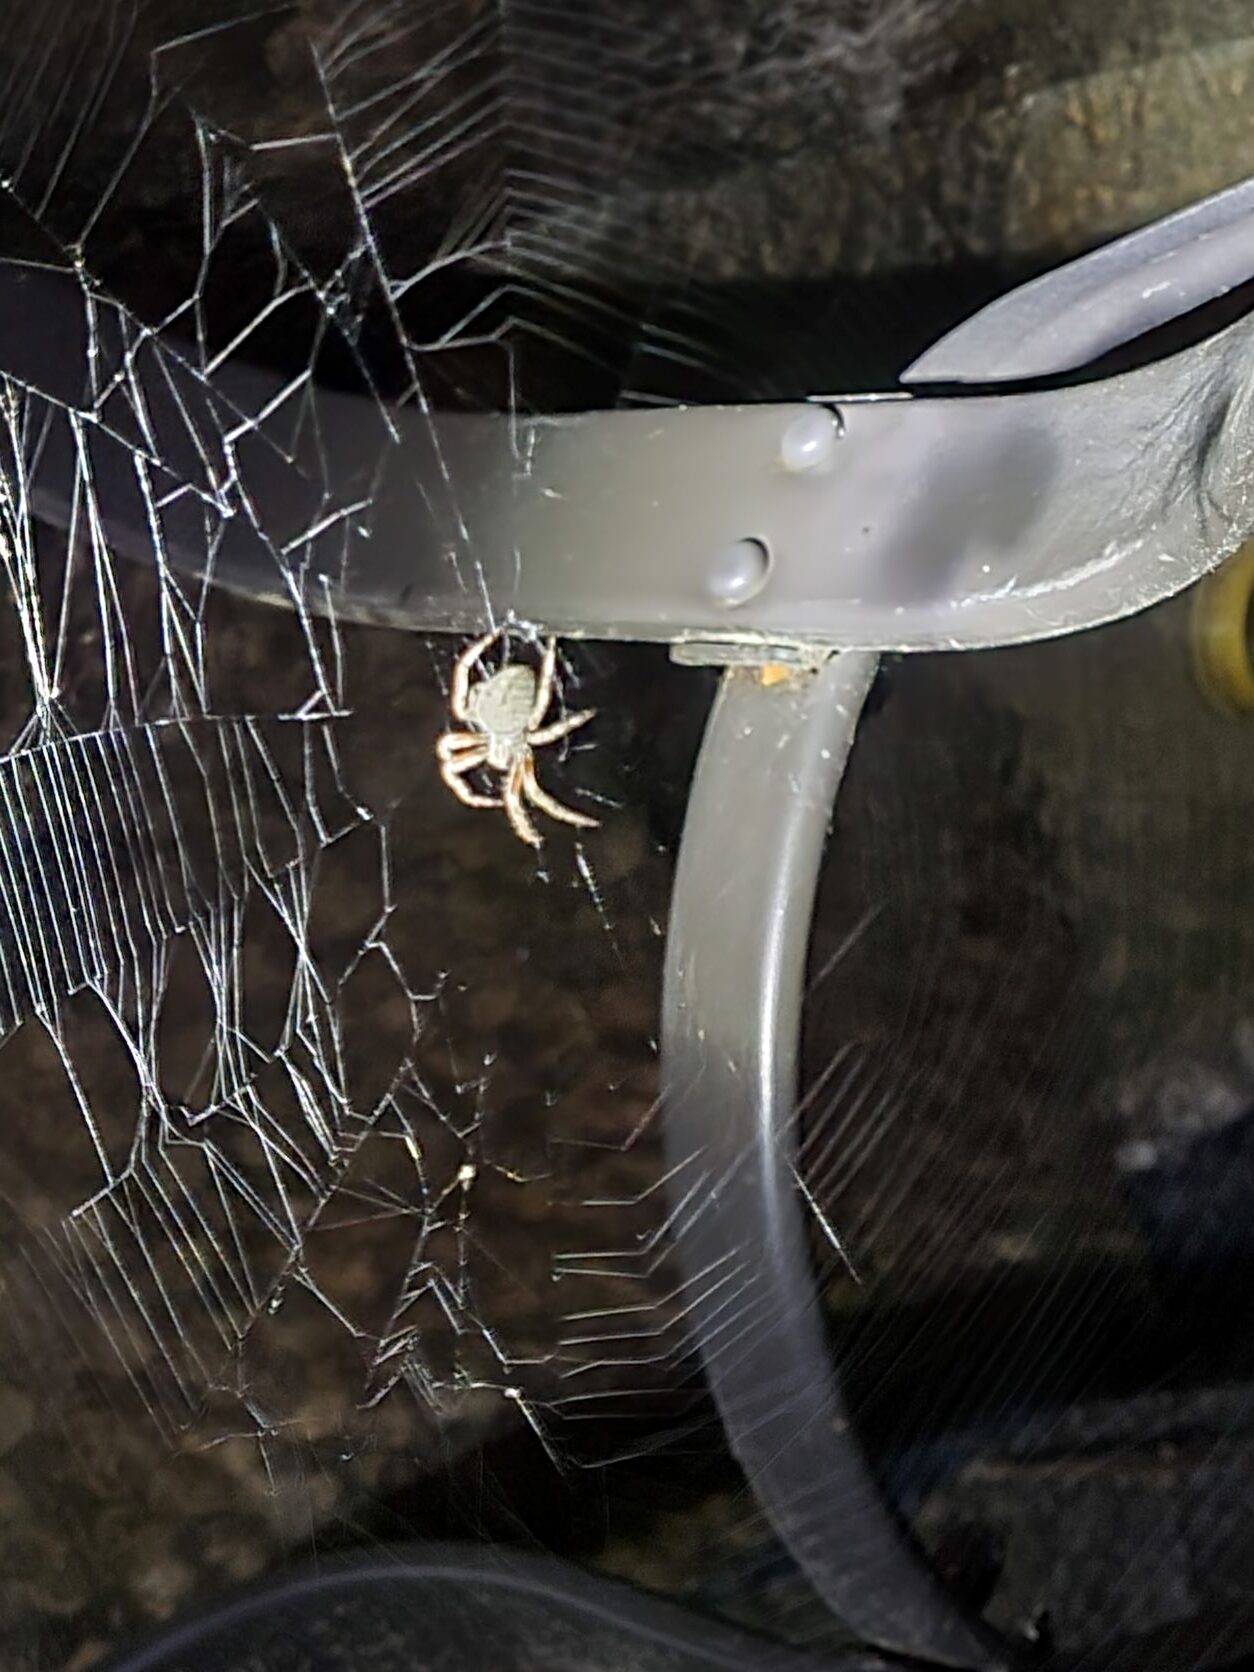 Spider – Possibly a Cross Orb Weaver?